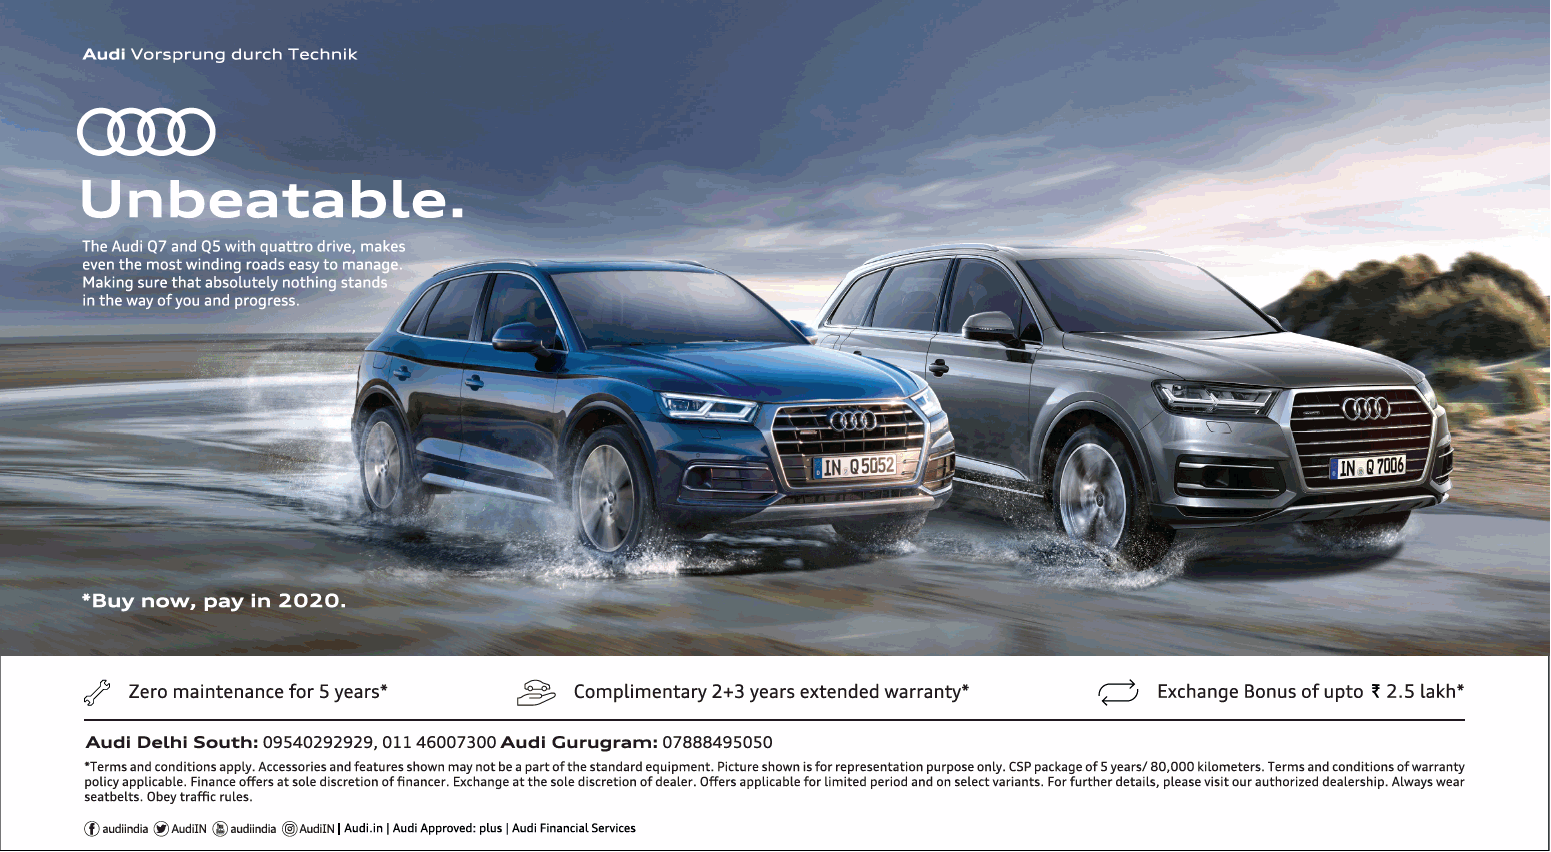 audi-unbeatable-buy-now-pay-in-2020-ad-delhi-times-24-07-2019.png